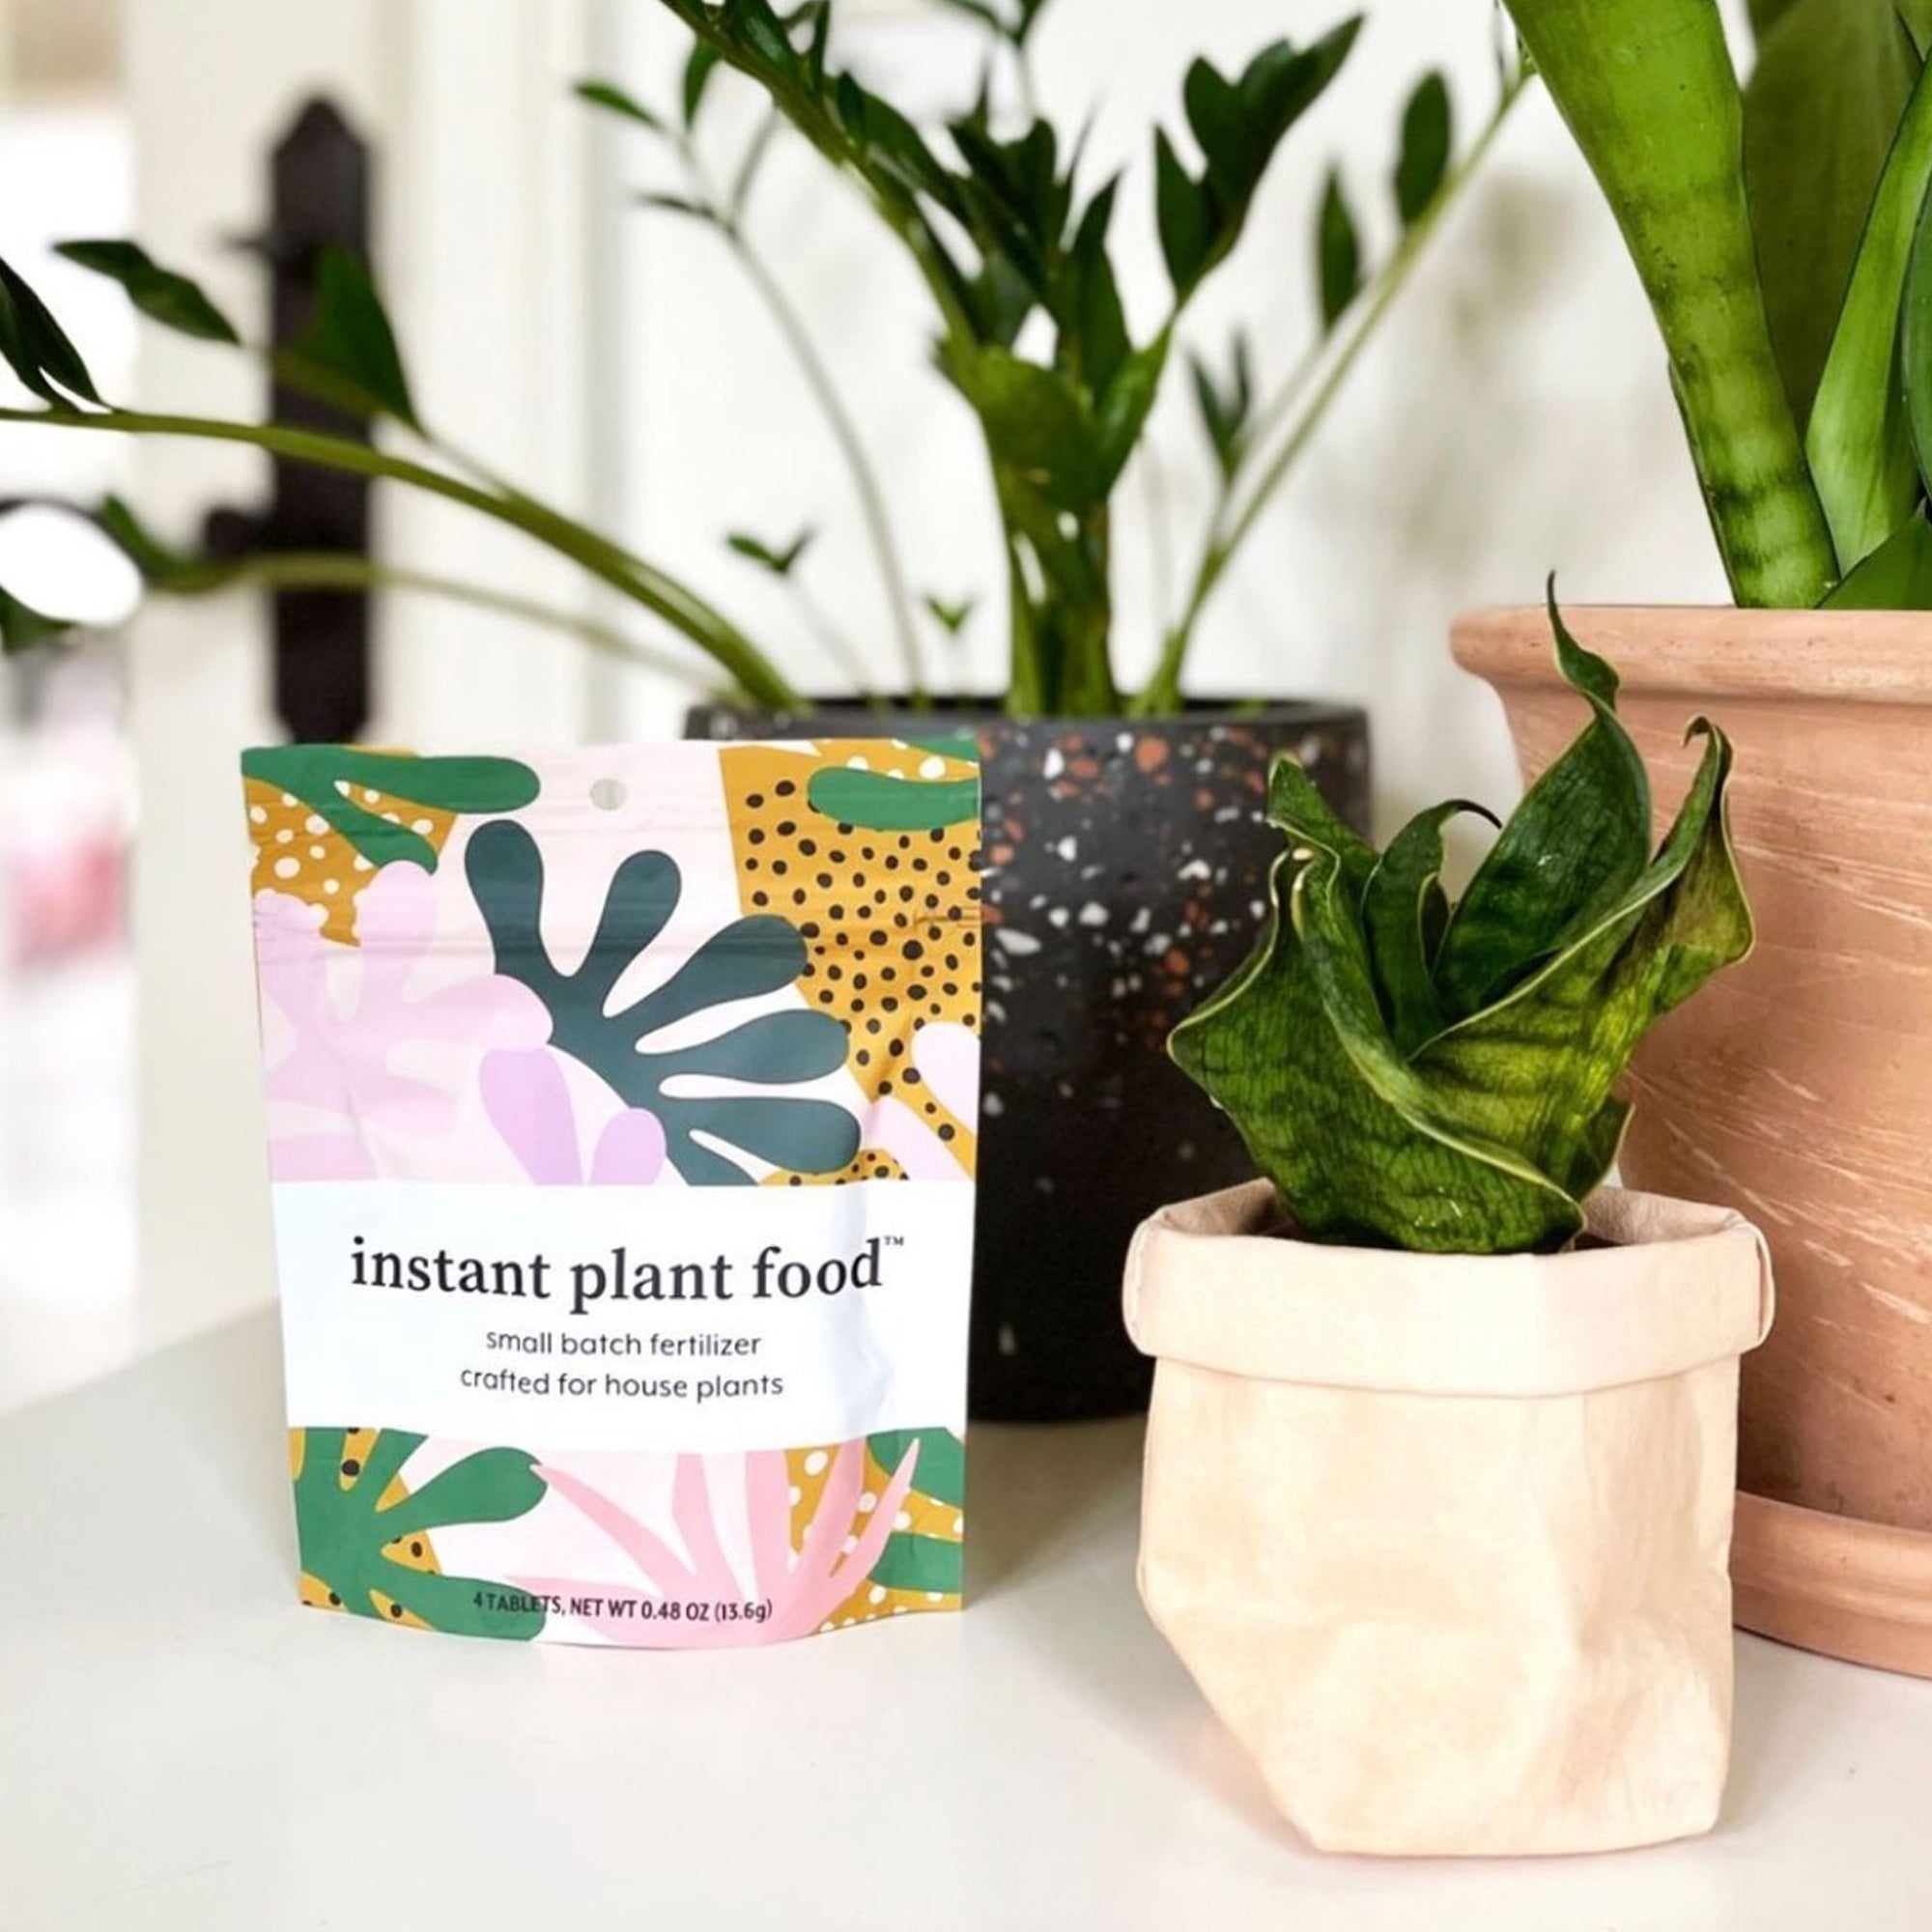 Great gift or stocking stuffer for plant lovers. (4) tablet package of Instant Plant Food easy-use, self-dissolving fertilizer tablets for feeding all types of houseplants.